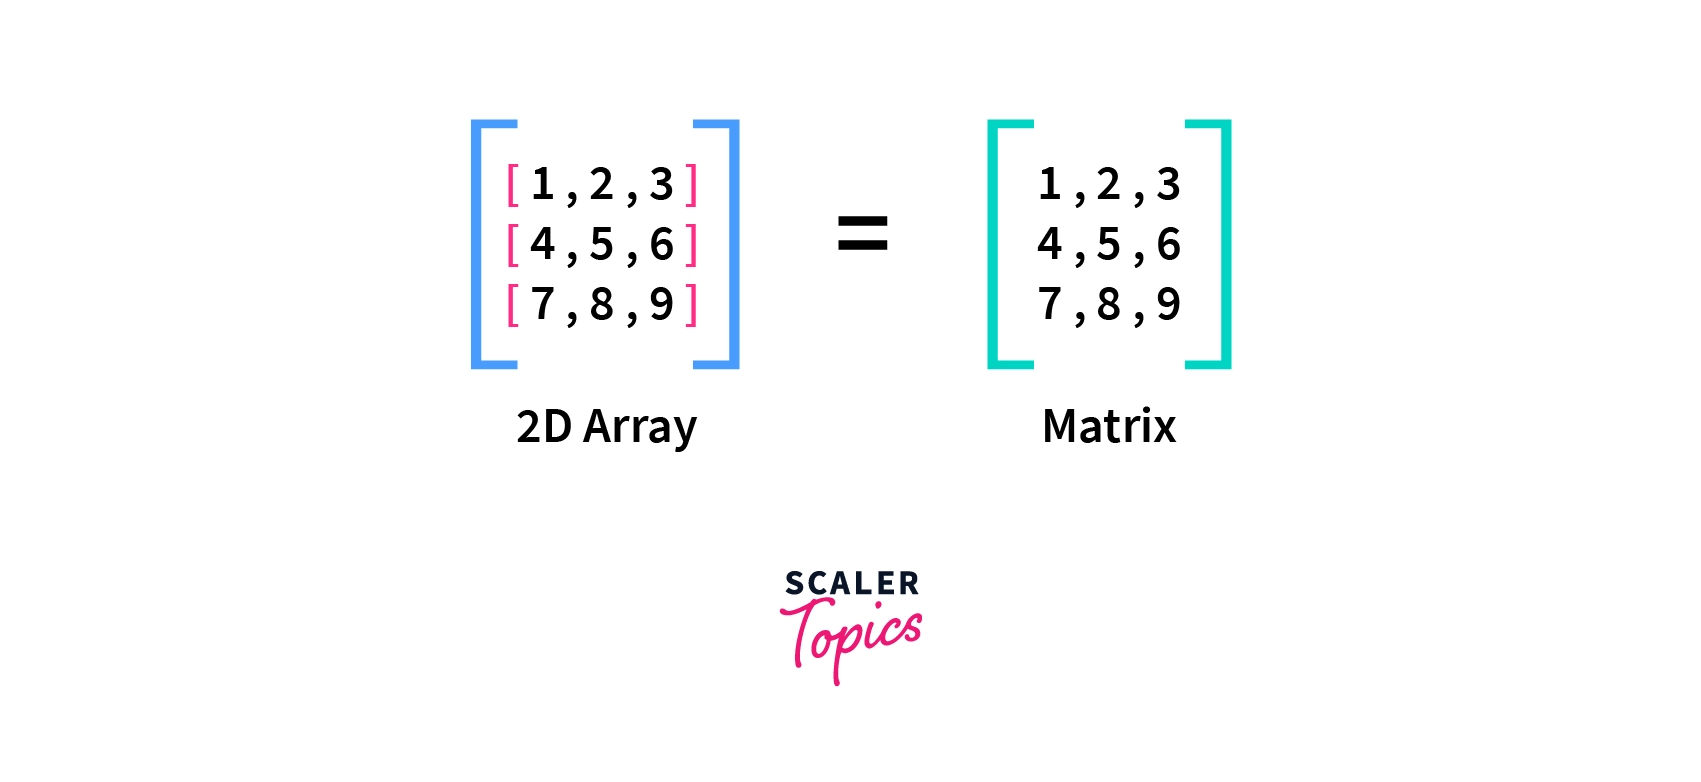 Use of 2D Array in Python